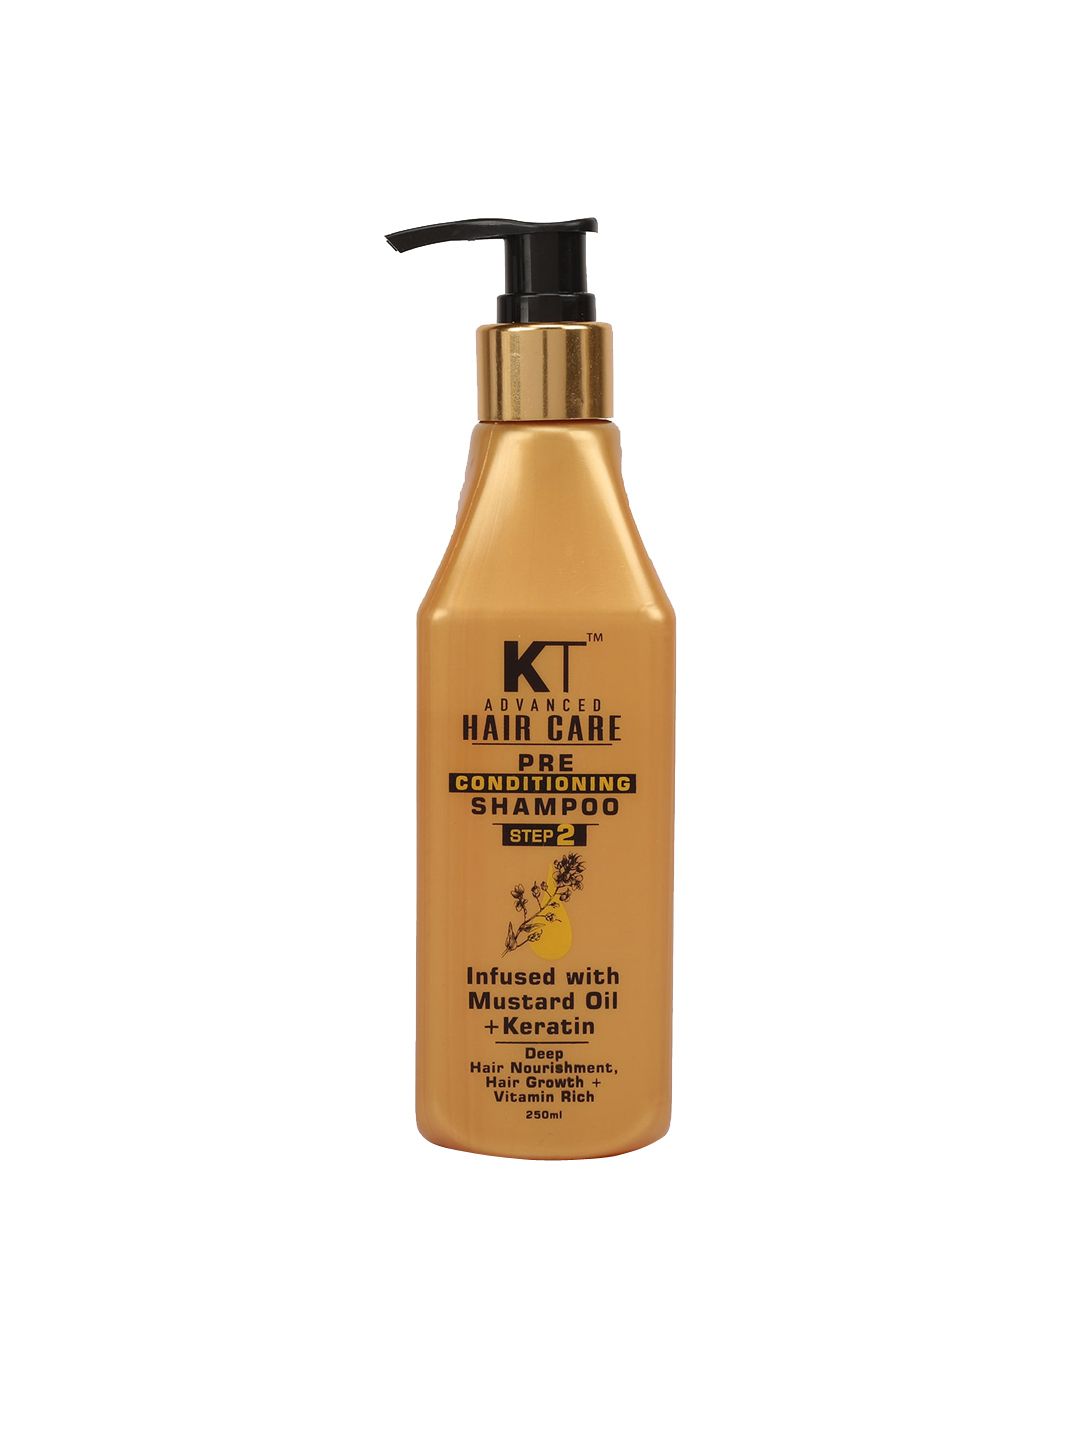 KEHAIRTHERAPY Advanced Hair Care Pre-Conditioning Shampoo with Mustard Oil & Keratin-250ml Price in India